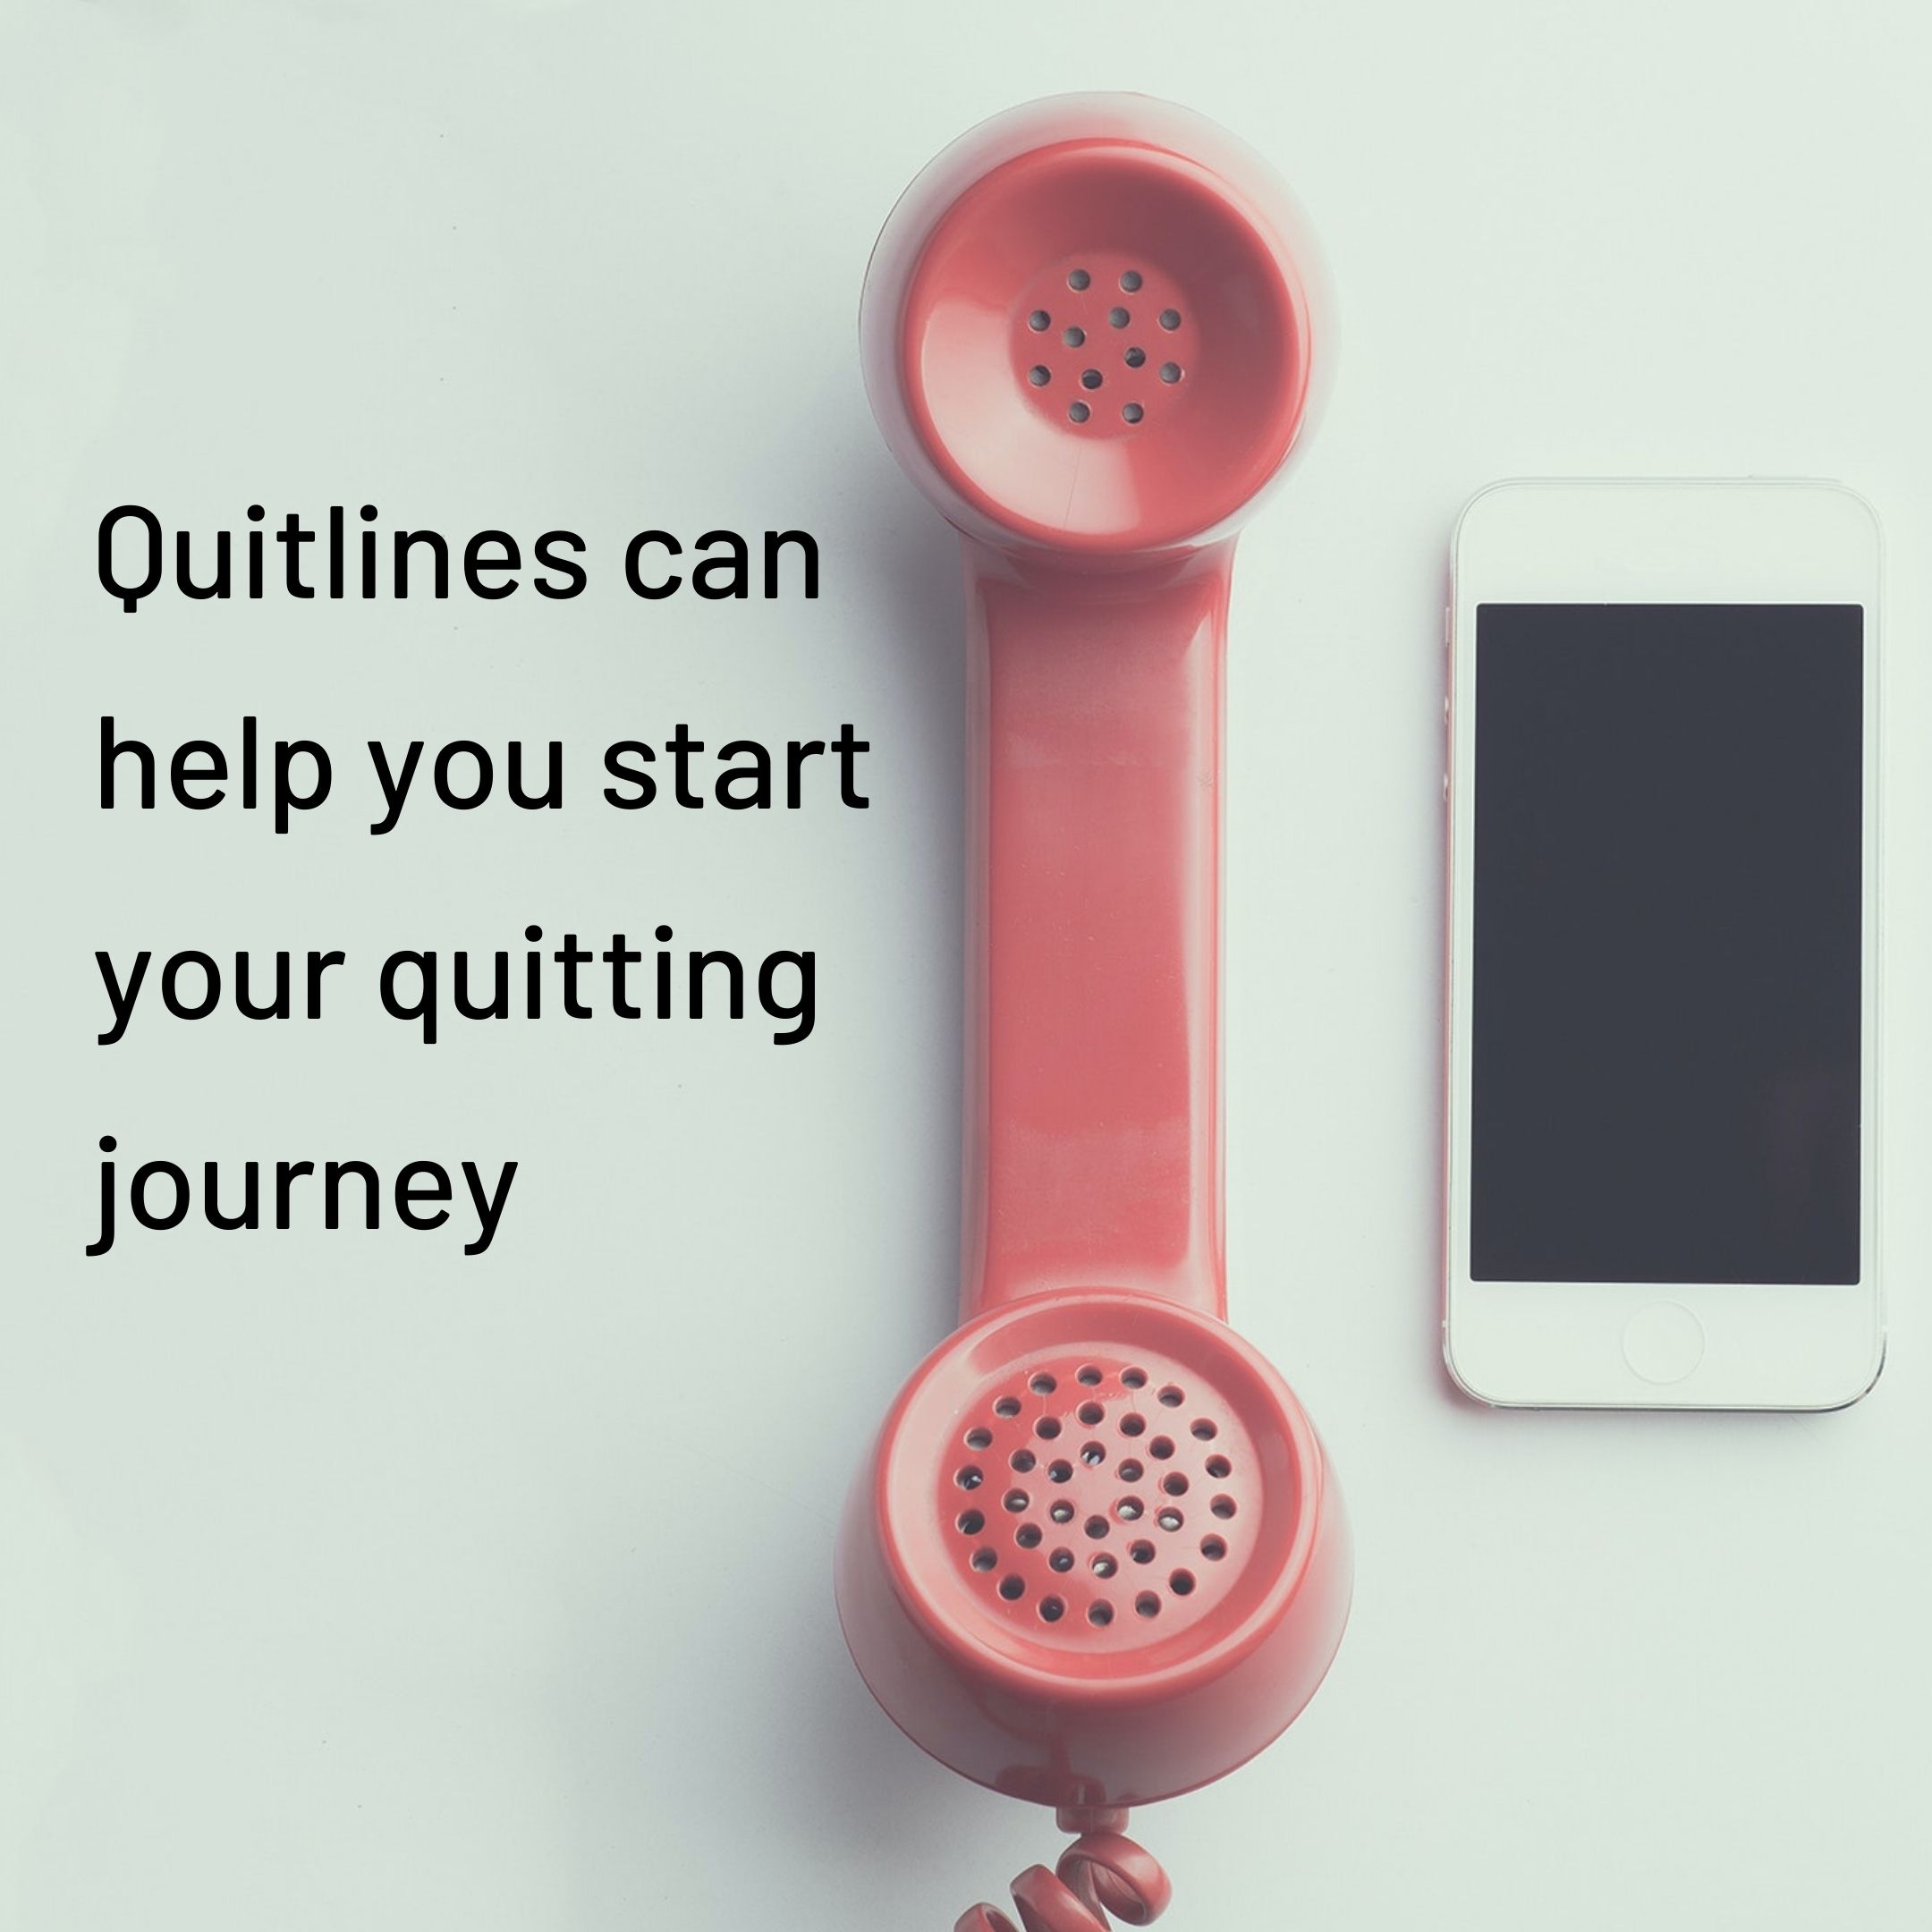 call_a_quitline_to_start_your_quitting_journey